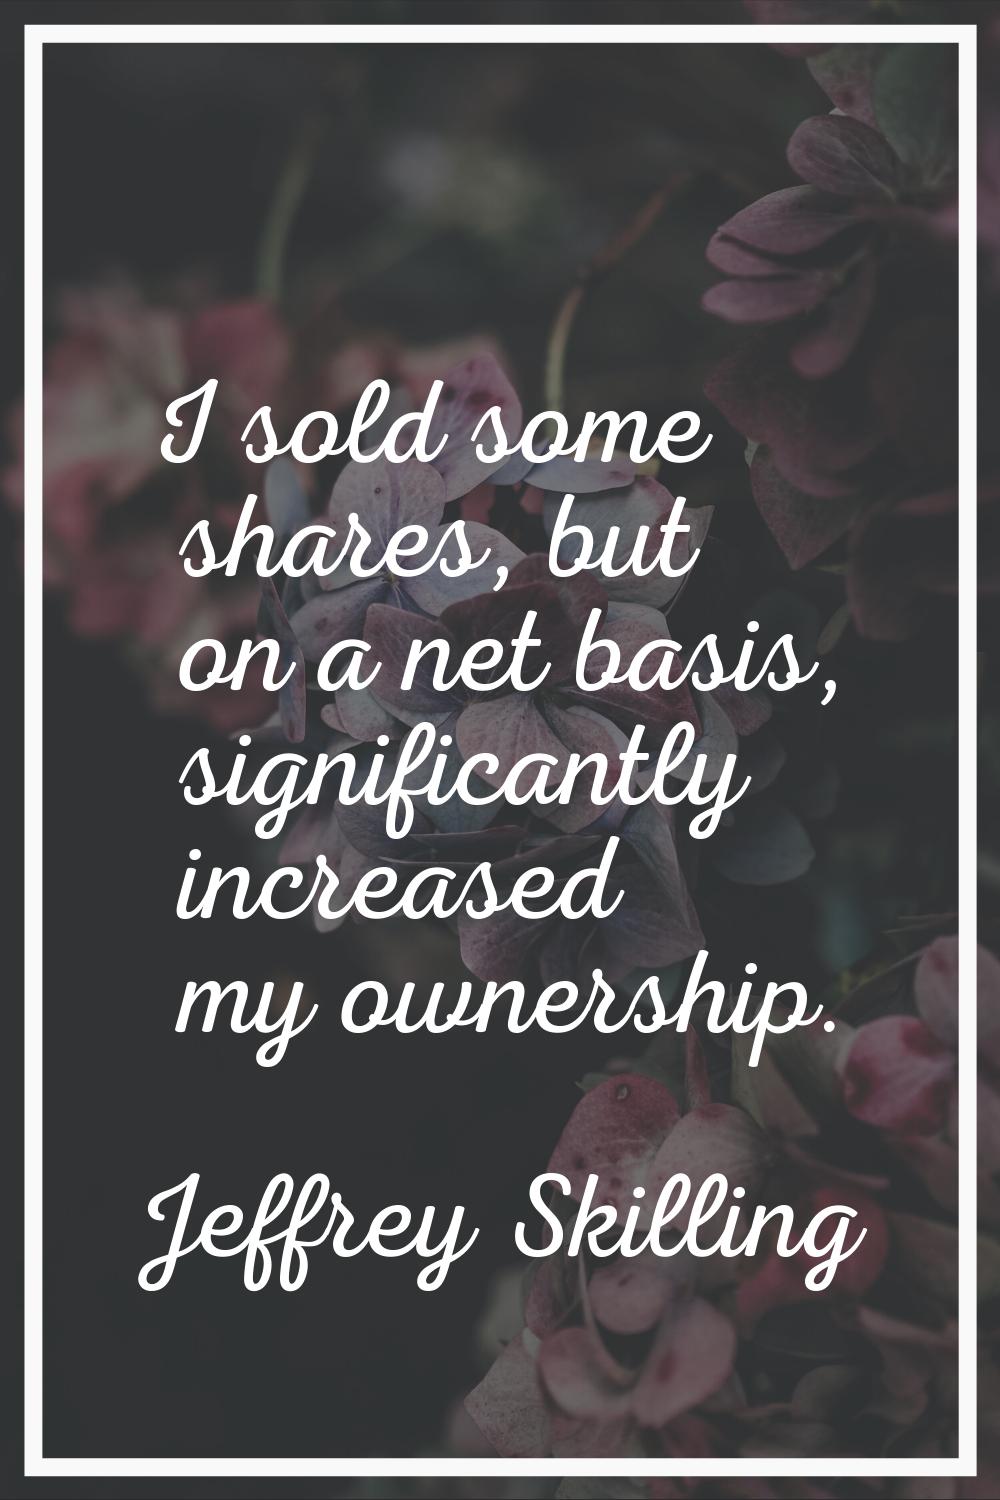 I sold some shares, but on a net basis, significantly increased my ownership.